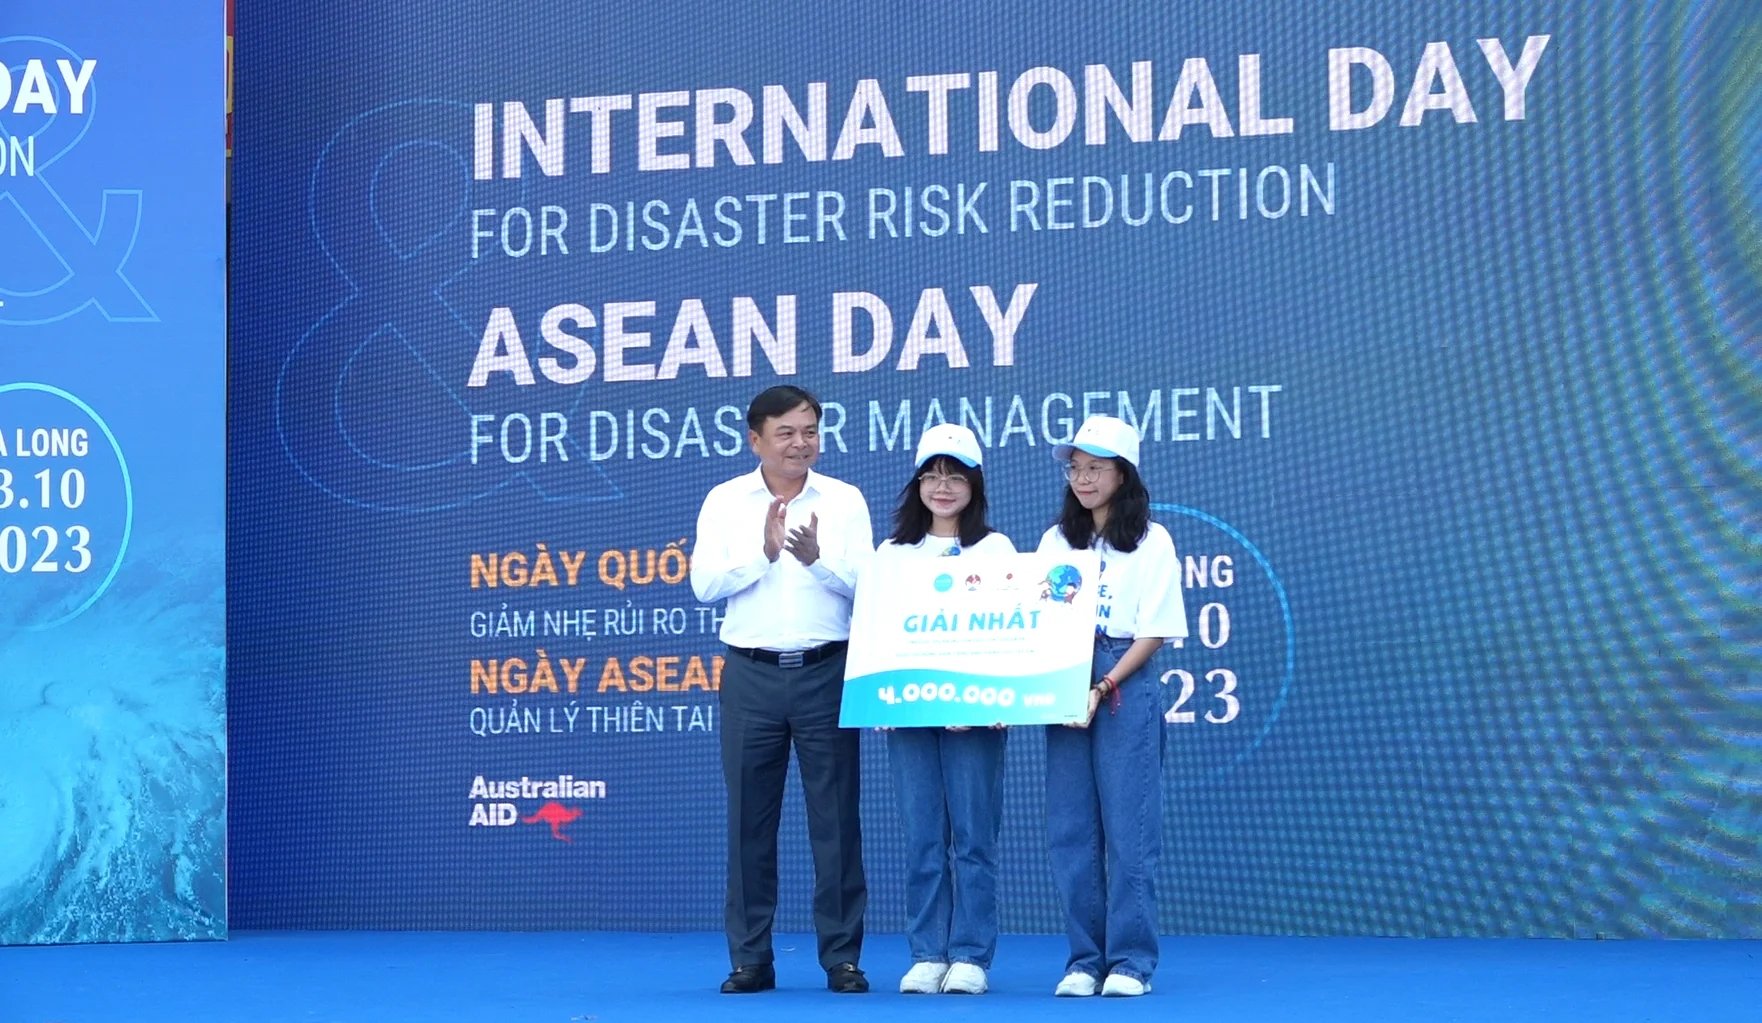 MARD Deputy Minister Nguyen Hoang Hiep awards the prize of the 'The English Speaking Contest on disaster risk reduction and climate actions' to two students, Tran Dang Thanh Phuong and Le Minh Thu. Photo: Nguyen Thanh.